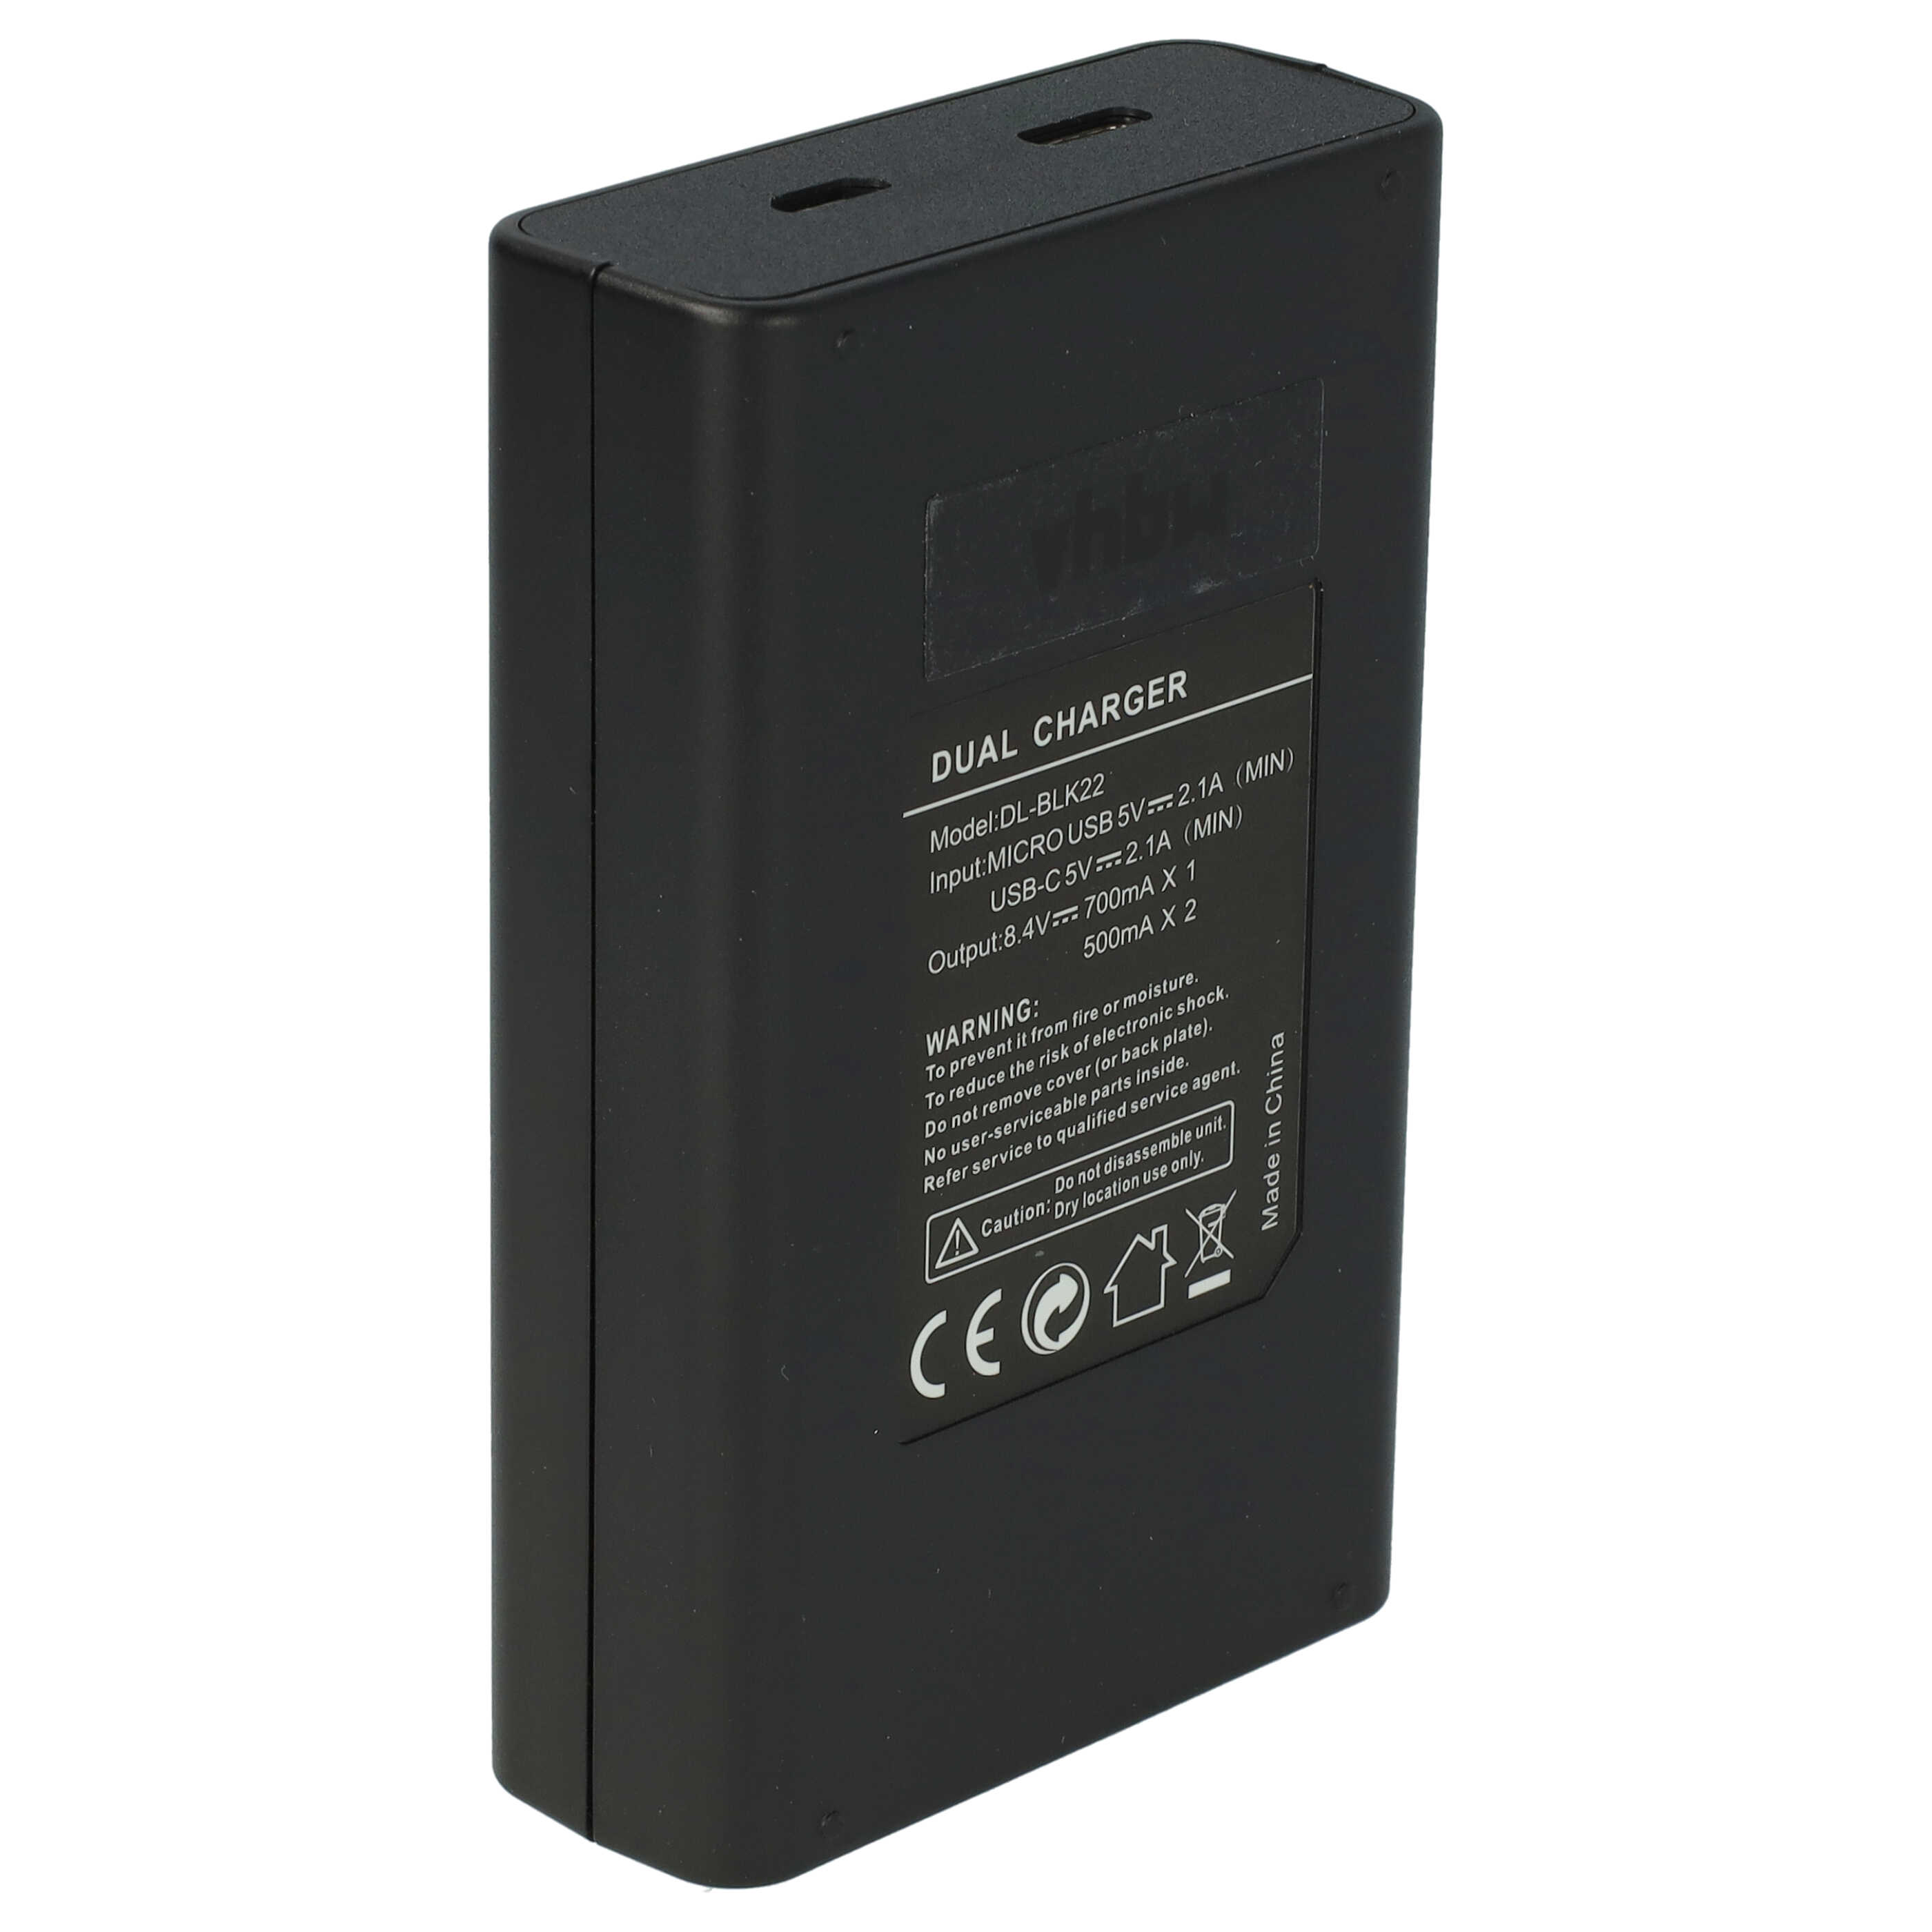 Battery Charger suitable for Panasonic DC-G9 Camera 8.4 V